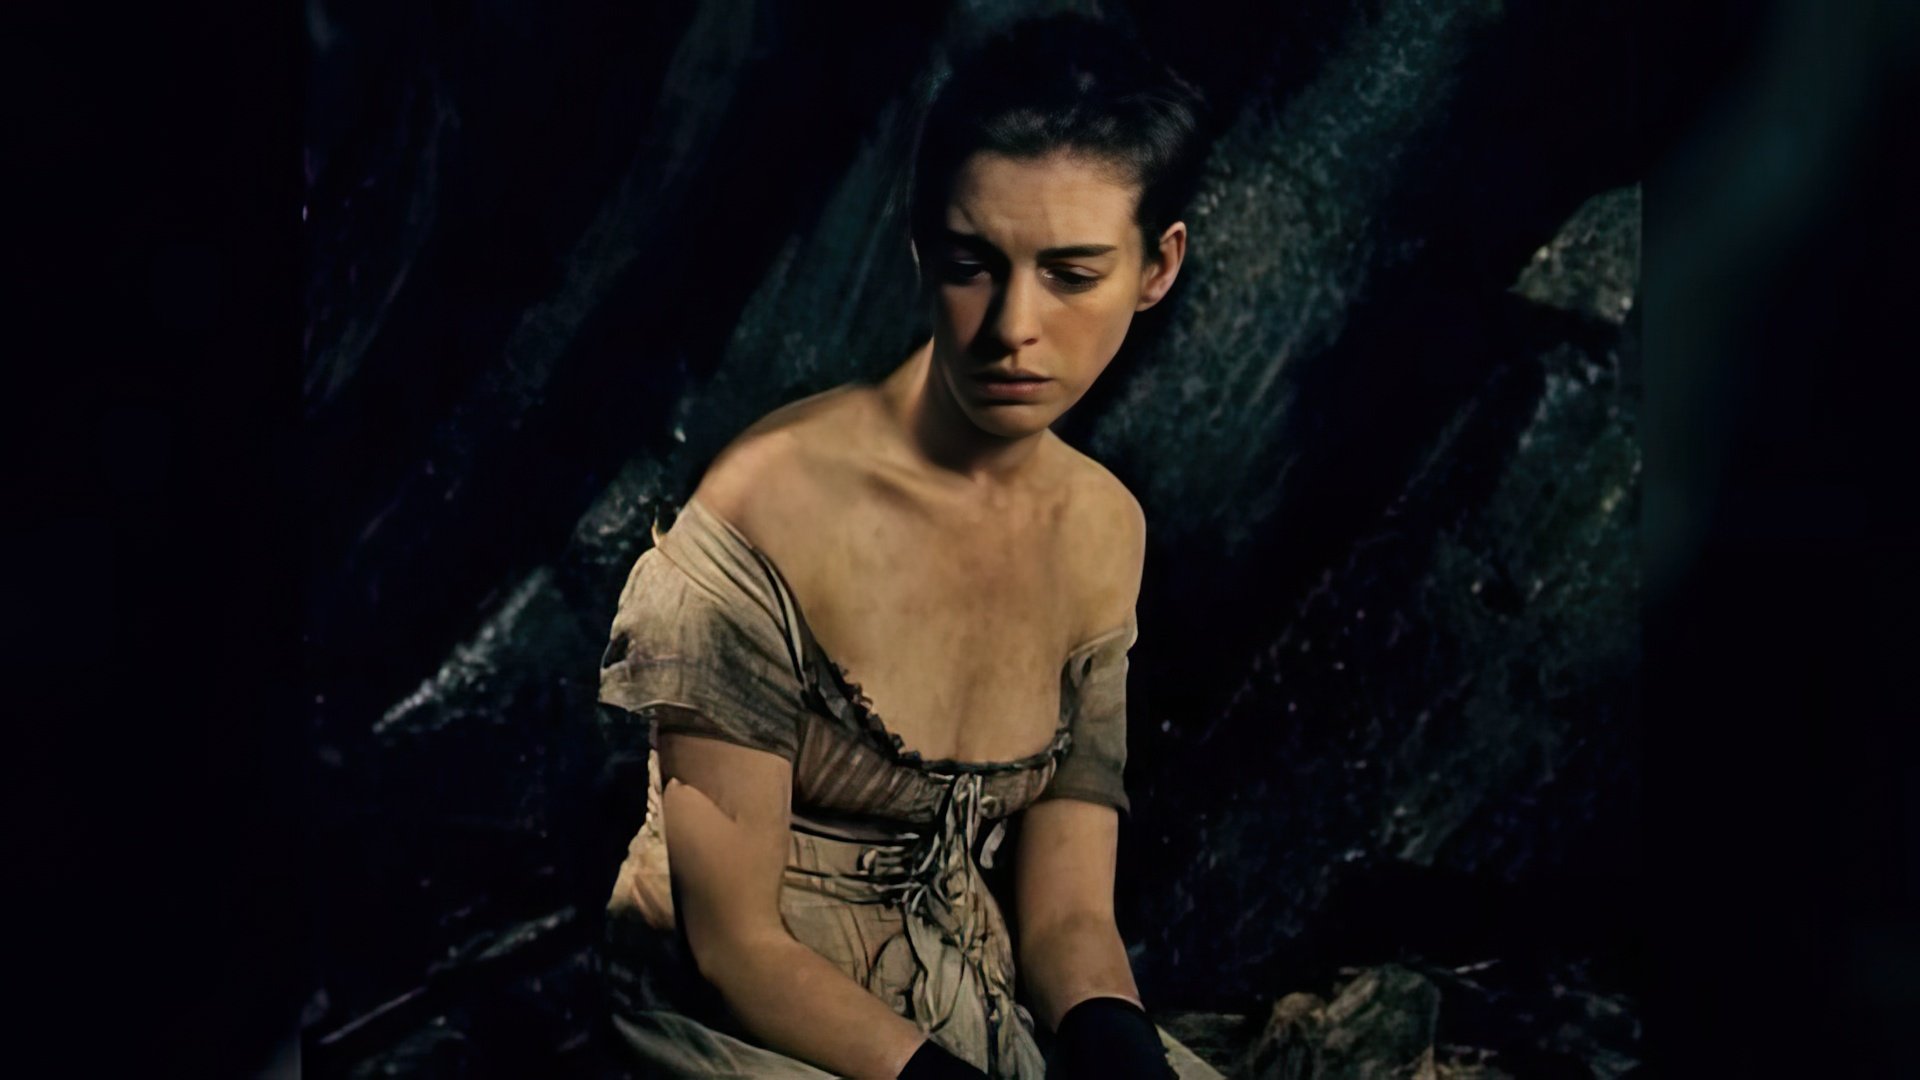 Anne Hathaway won an Oscar for her role as Fantine in Les Misérables